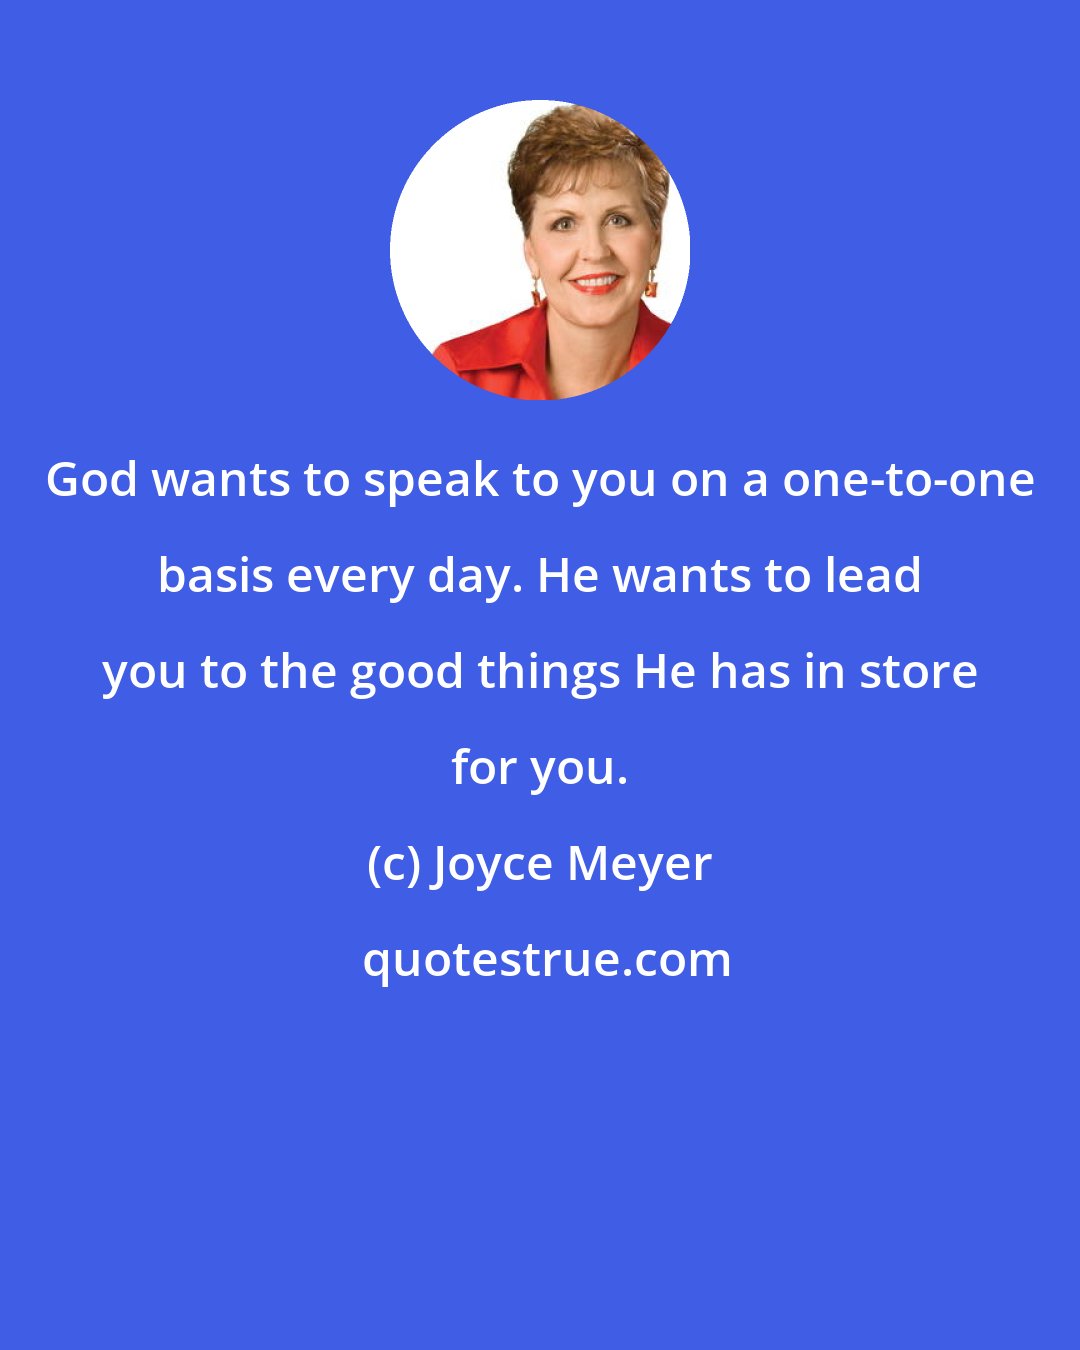 Joyce Meyer: God wants to speak to you on a one-to-one basis every day. He wants to lead you to the good things He has in store for you.